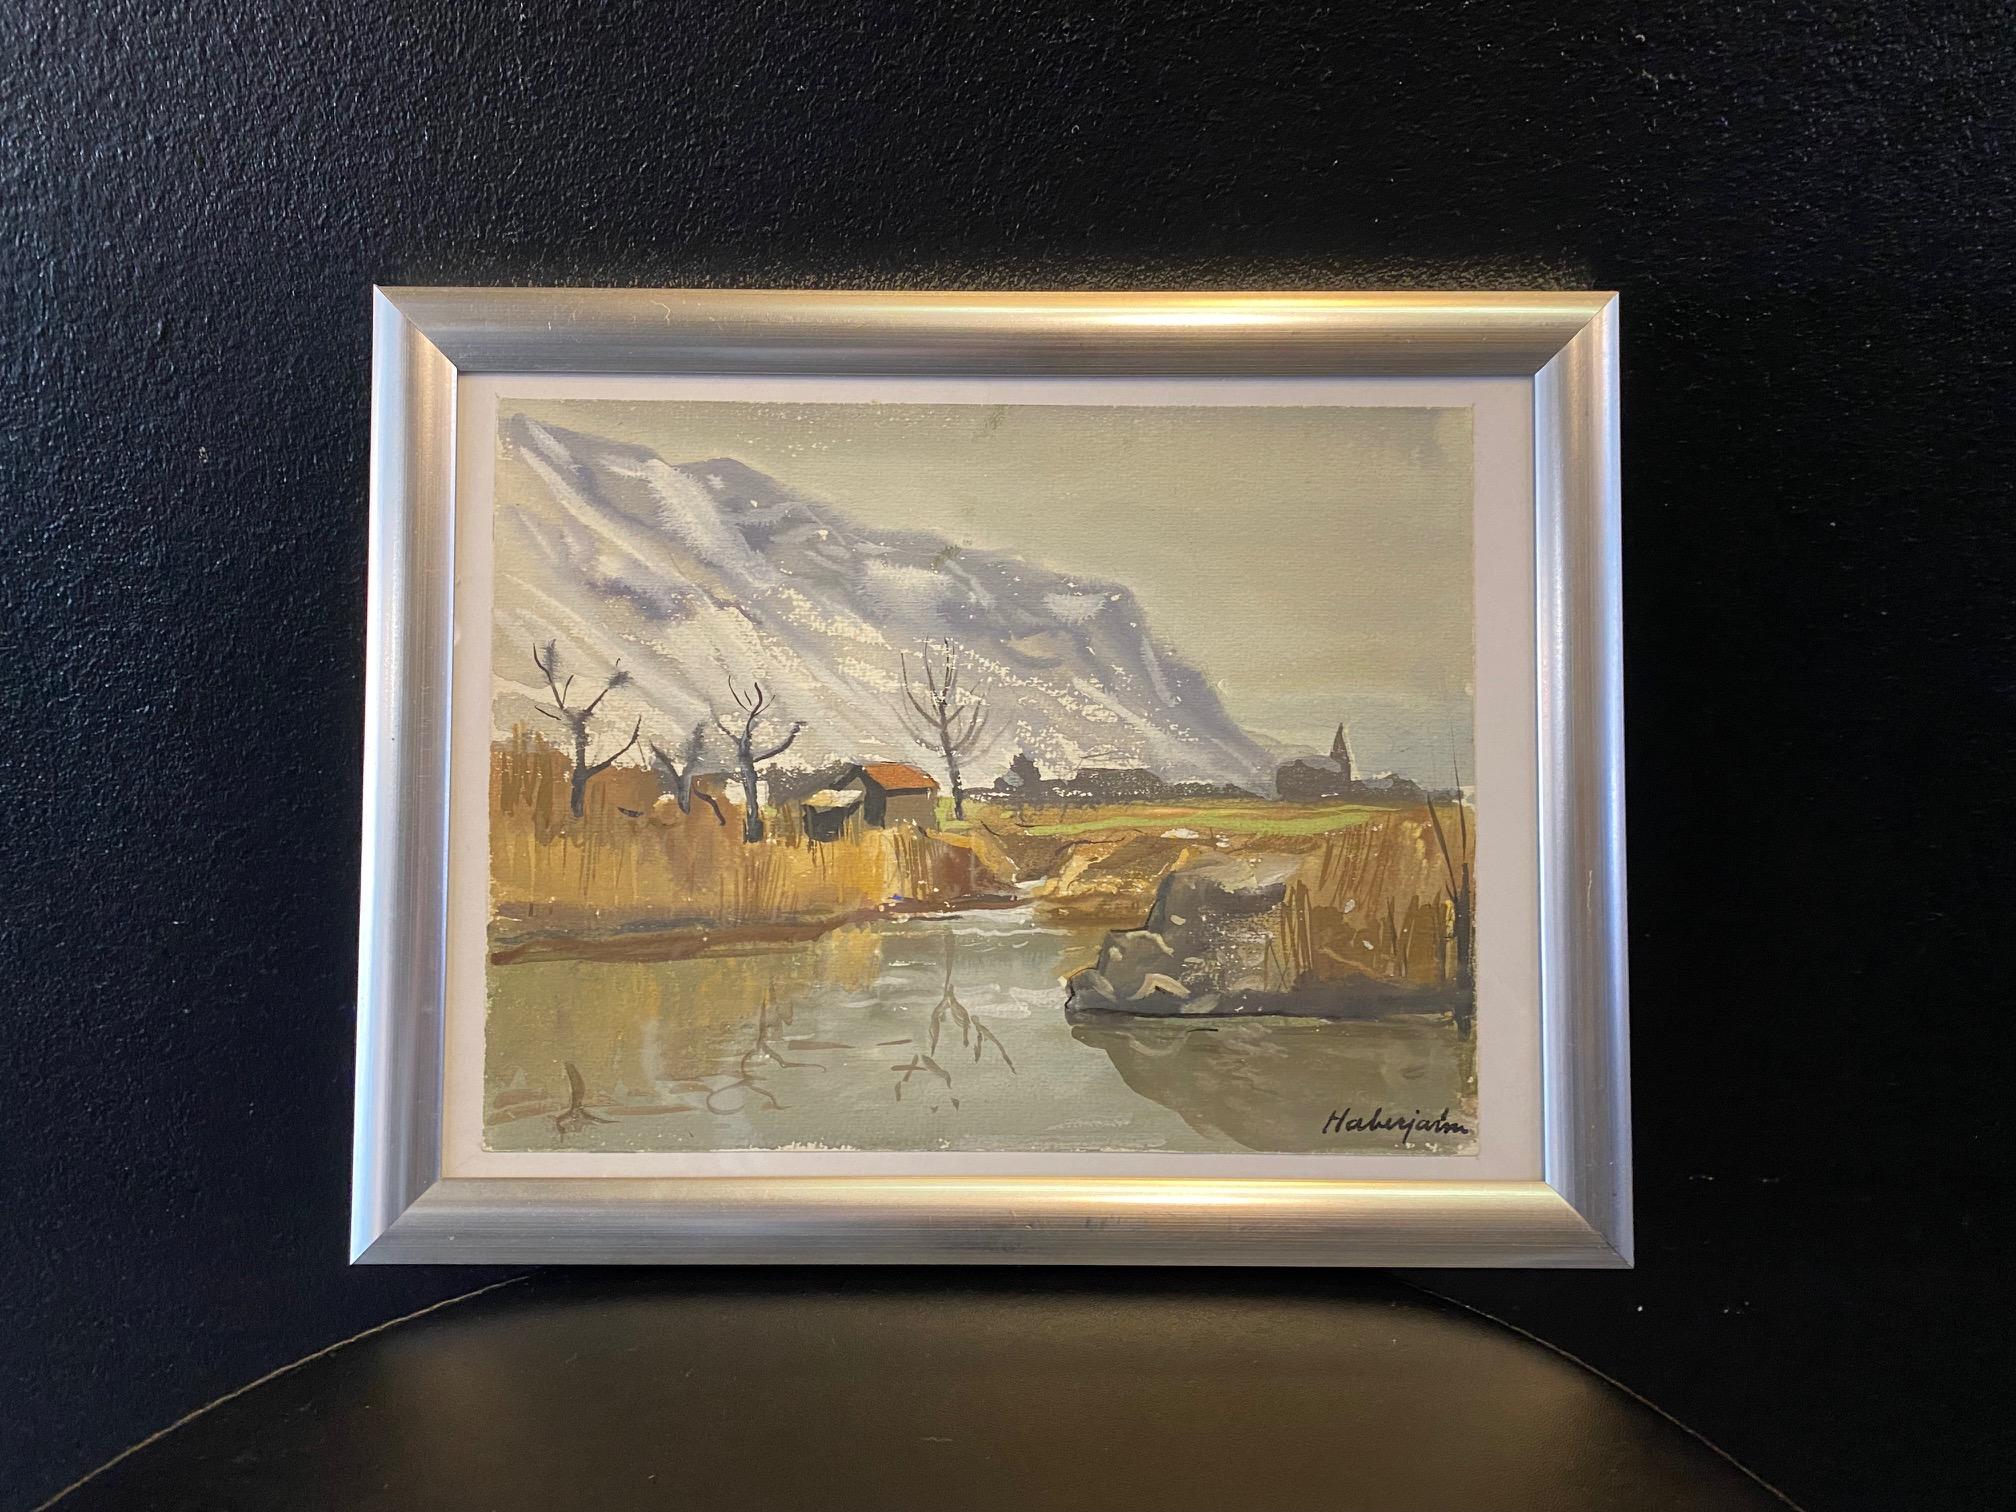 River and snowy mountains by G. E. Haberjahn - Watercolor on paper 16x21 cm - Gray Landscape Painting by Gabriel Eduard Haberjahn